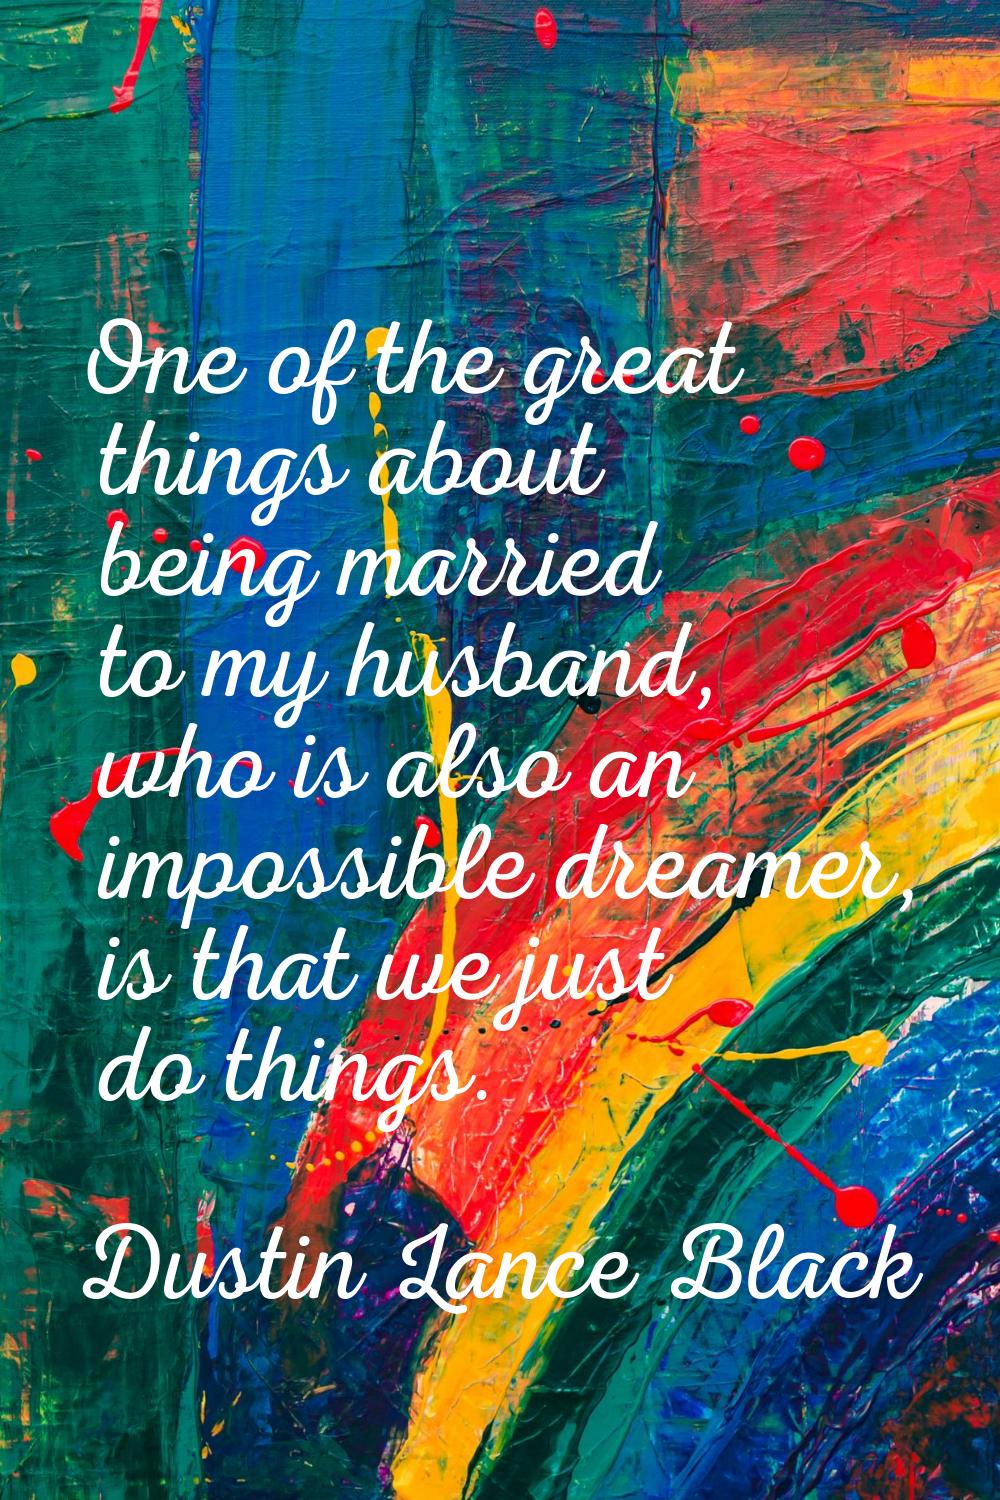 One of the great things about being married to my husband, who is also an impossible dreamer, is th